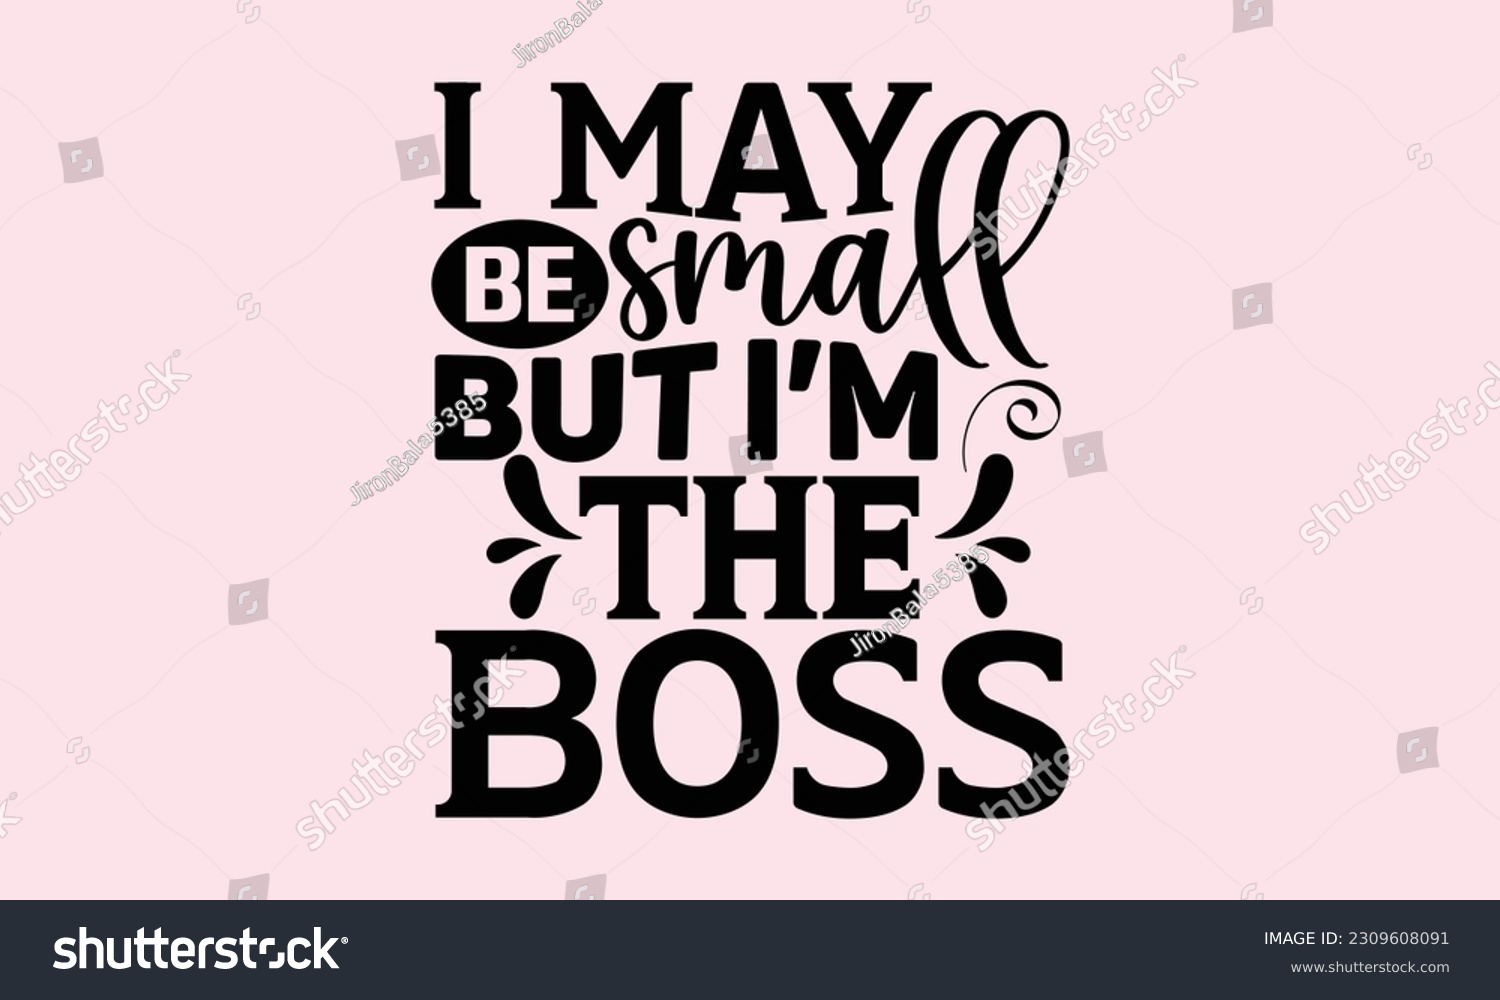 SVG of I May Be Small But I’m The Boss - Baby SVG Design, Hand drawn vintage illustration with lettering and decoration elements, used for prints on bags, posters, banners, pillows. svg